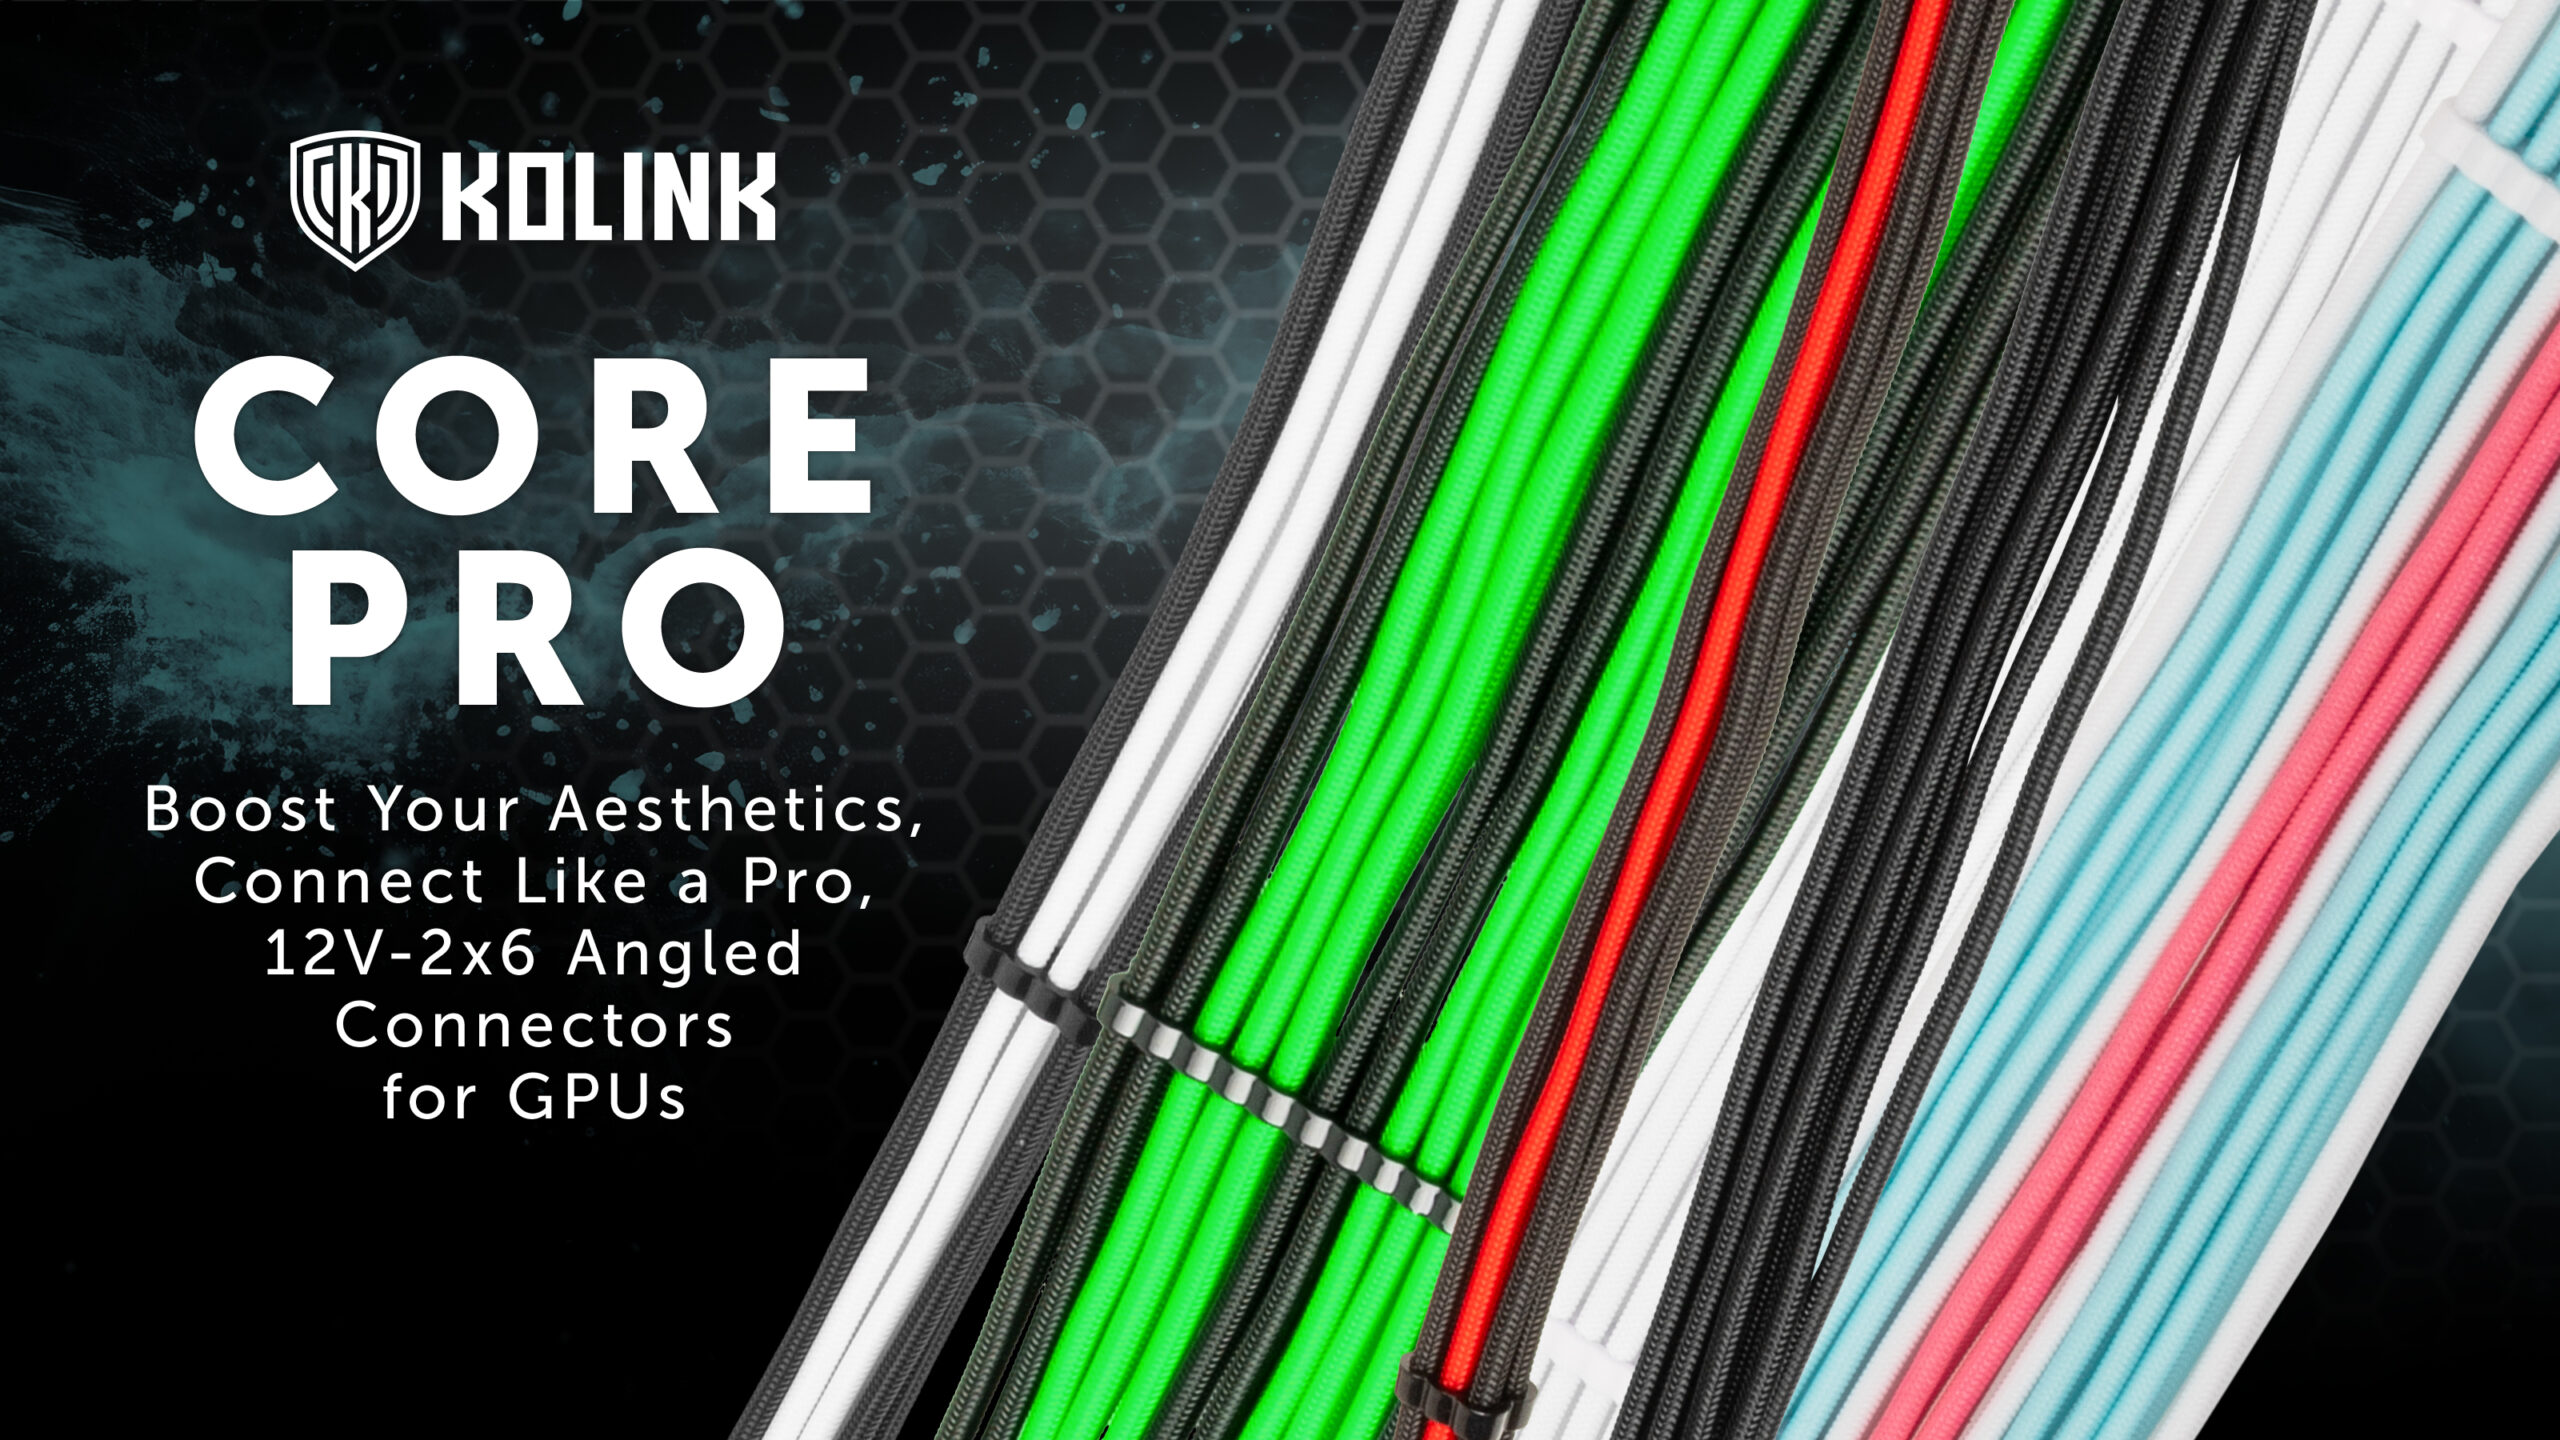 Kolink Core Pro 12V-2x6 Cables and Adapters: Ultimate Style and Performance